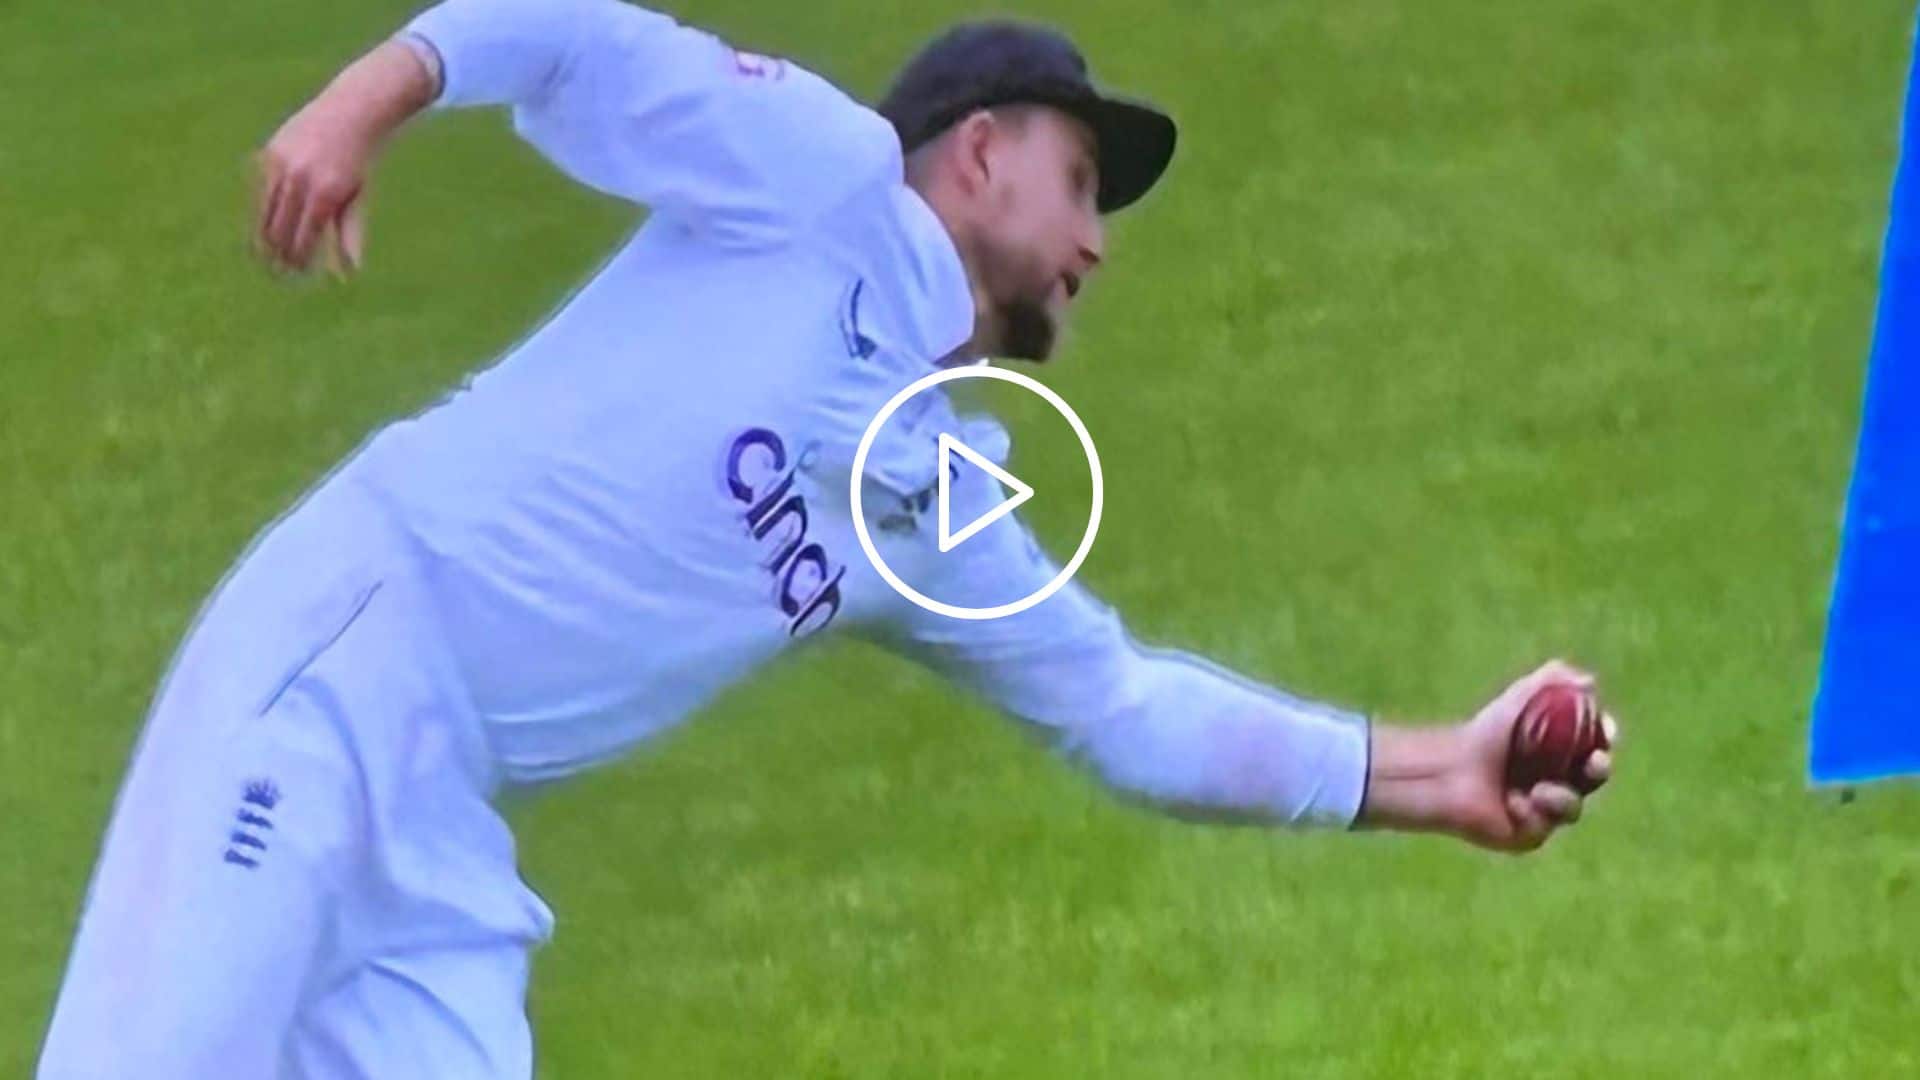 [WATCH] Joe Root's One-Handed Stunner Breaks Resilient Marnus Labuschagne At The Oval